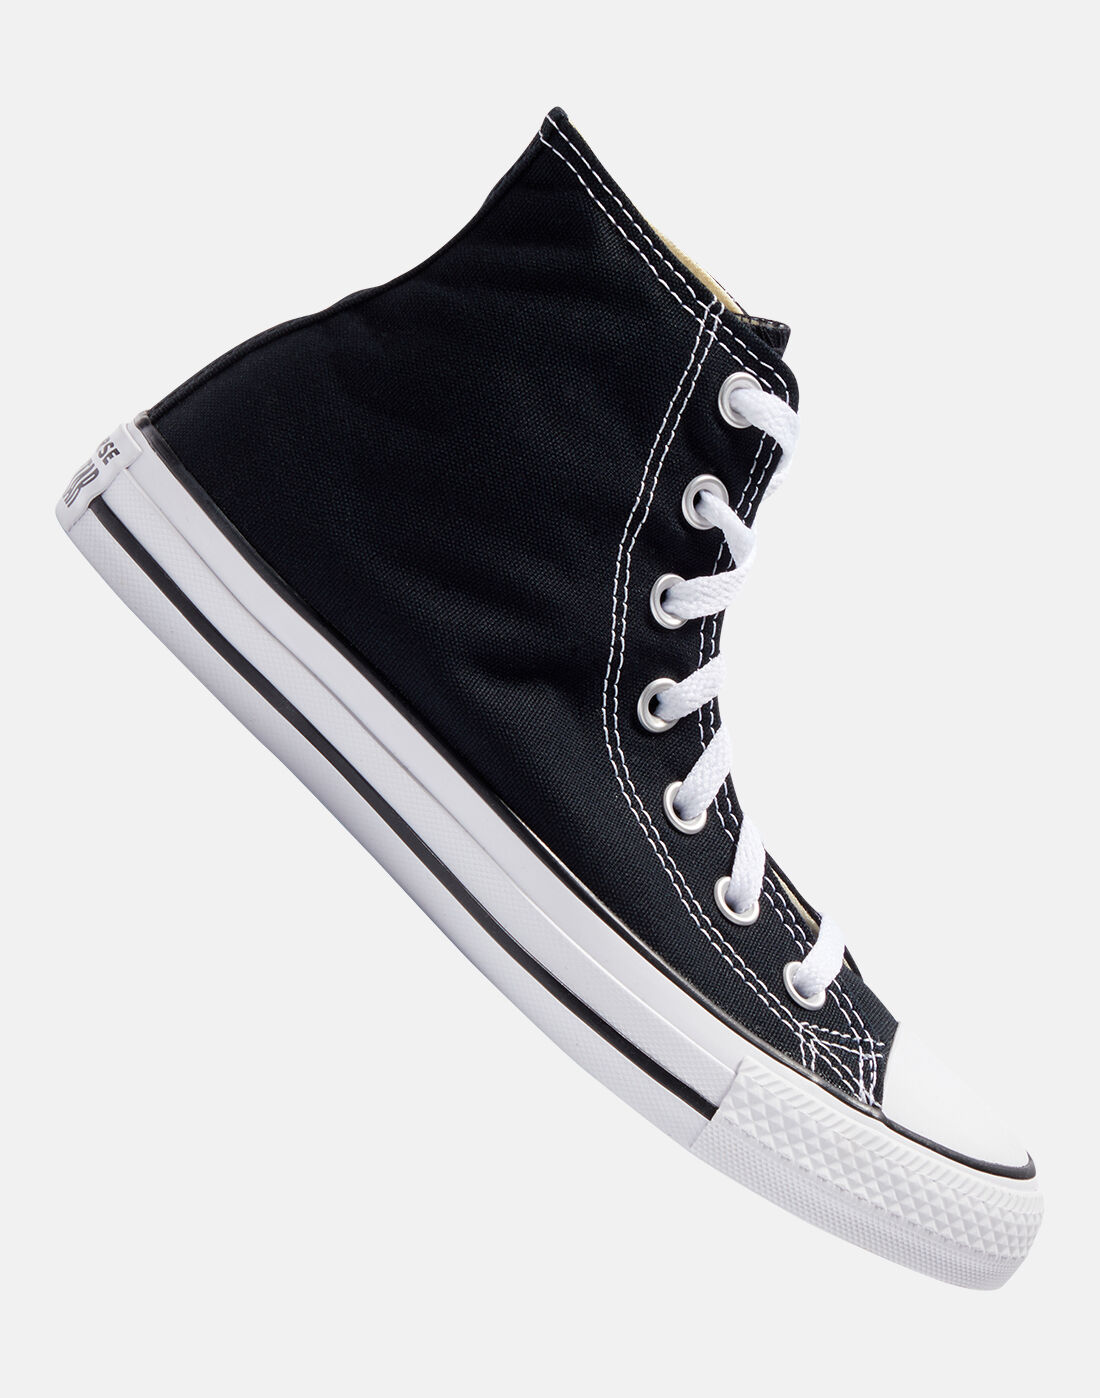 converse chuck taylor all star price philippines